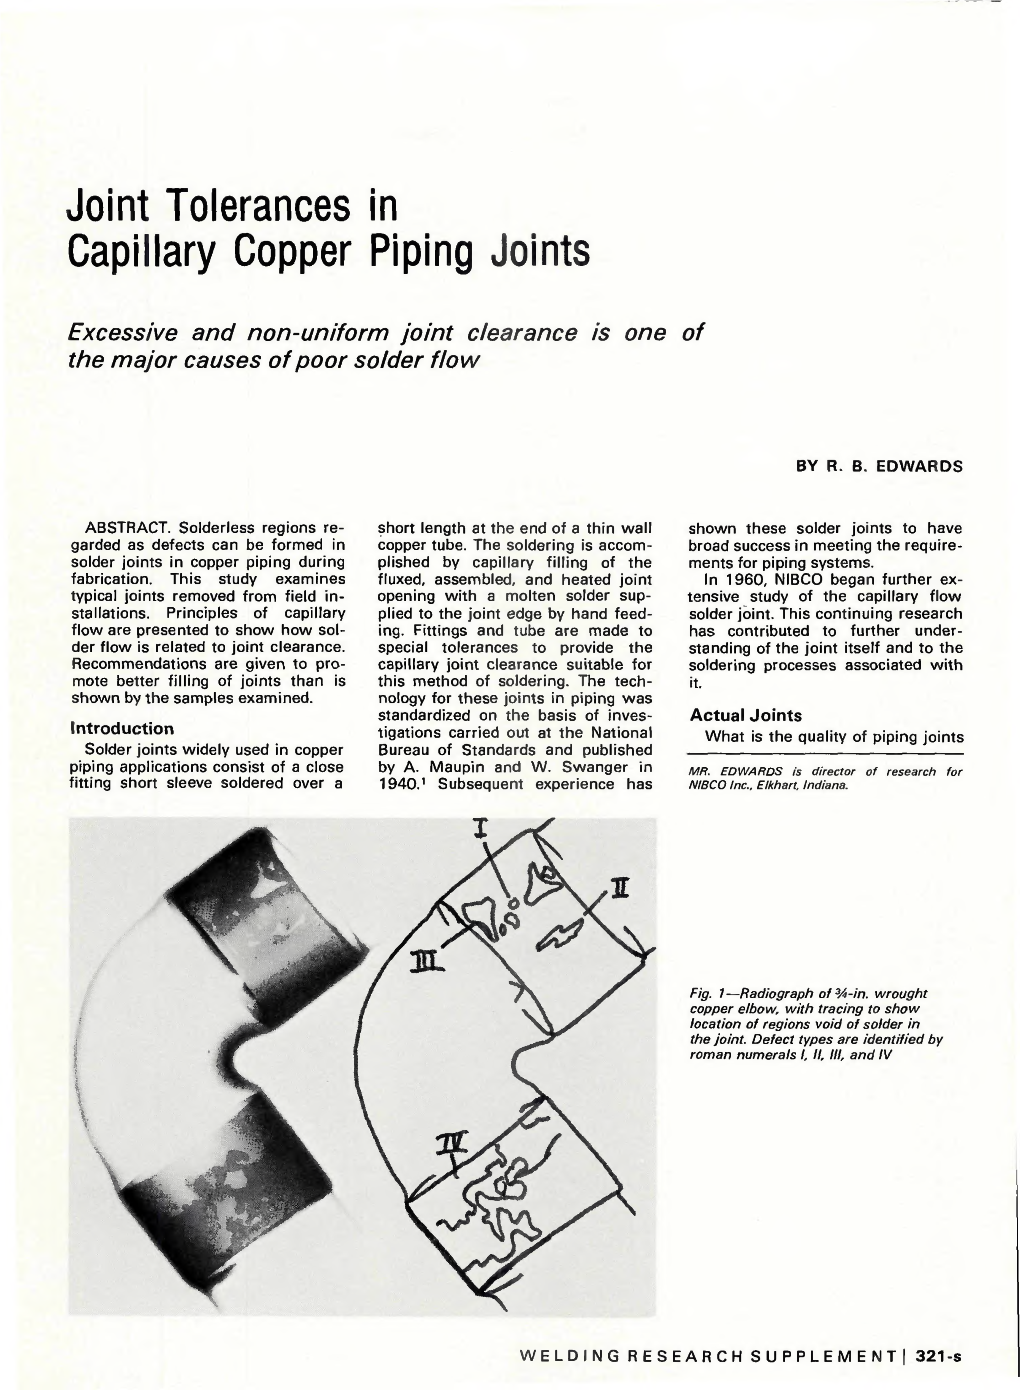 Joint Tolerances in Capillary Copper Piping Joints